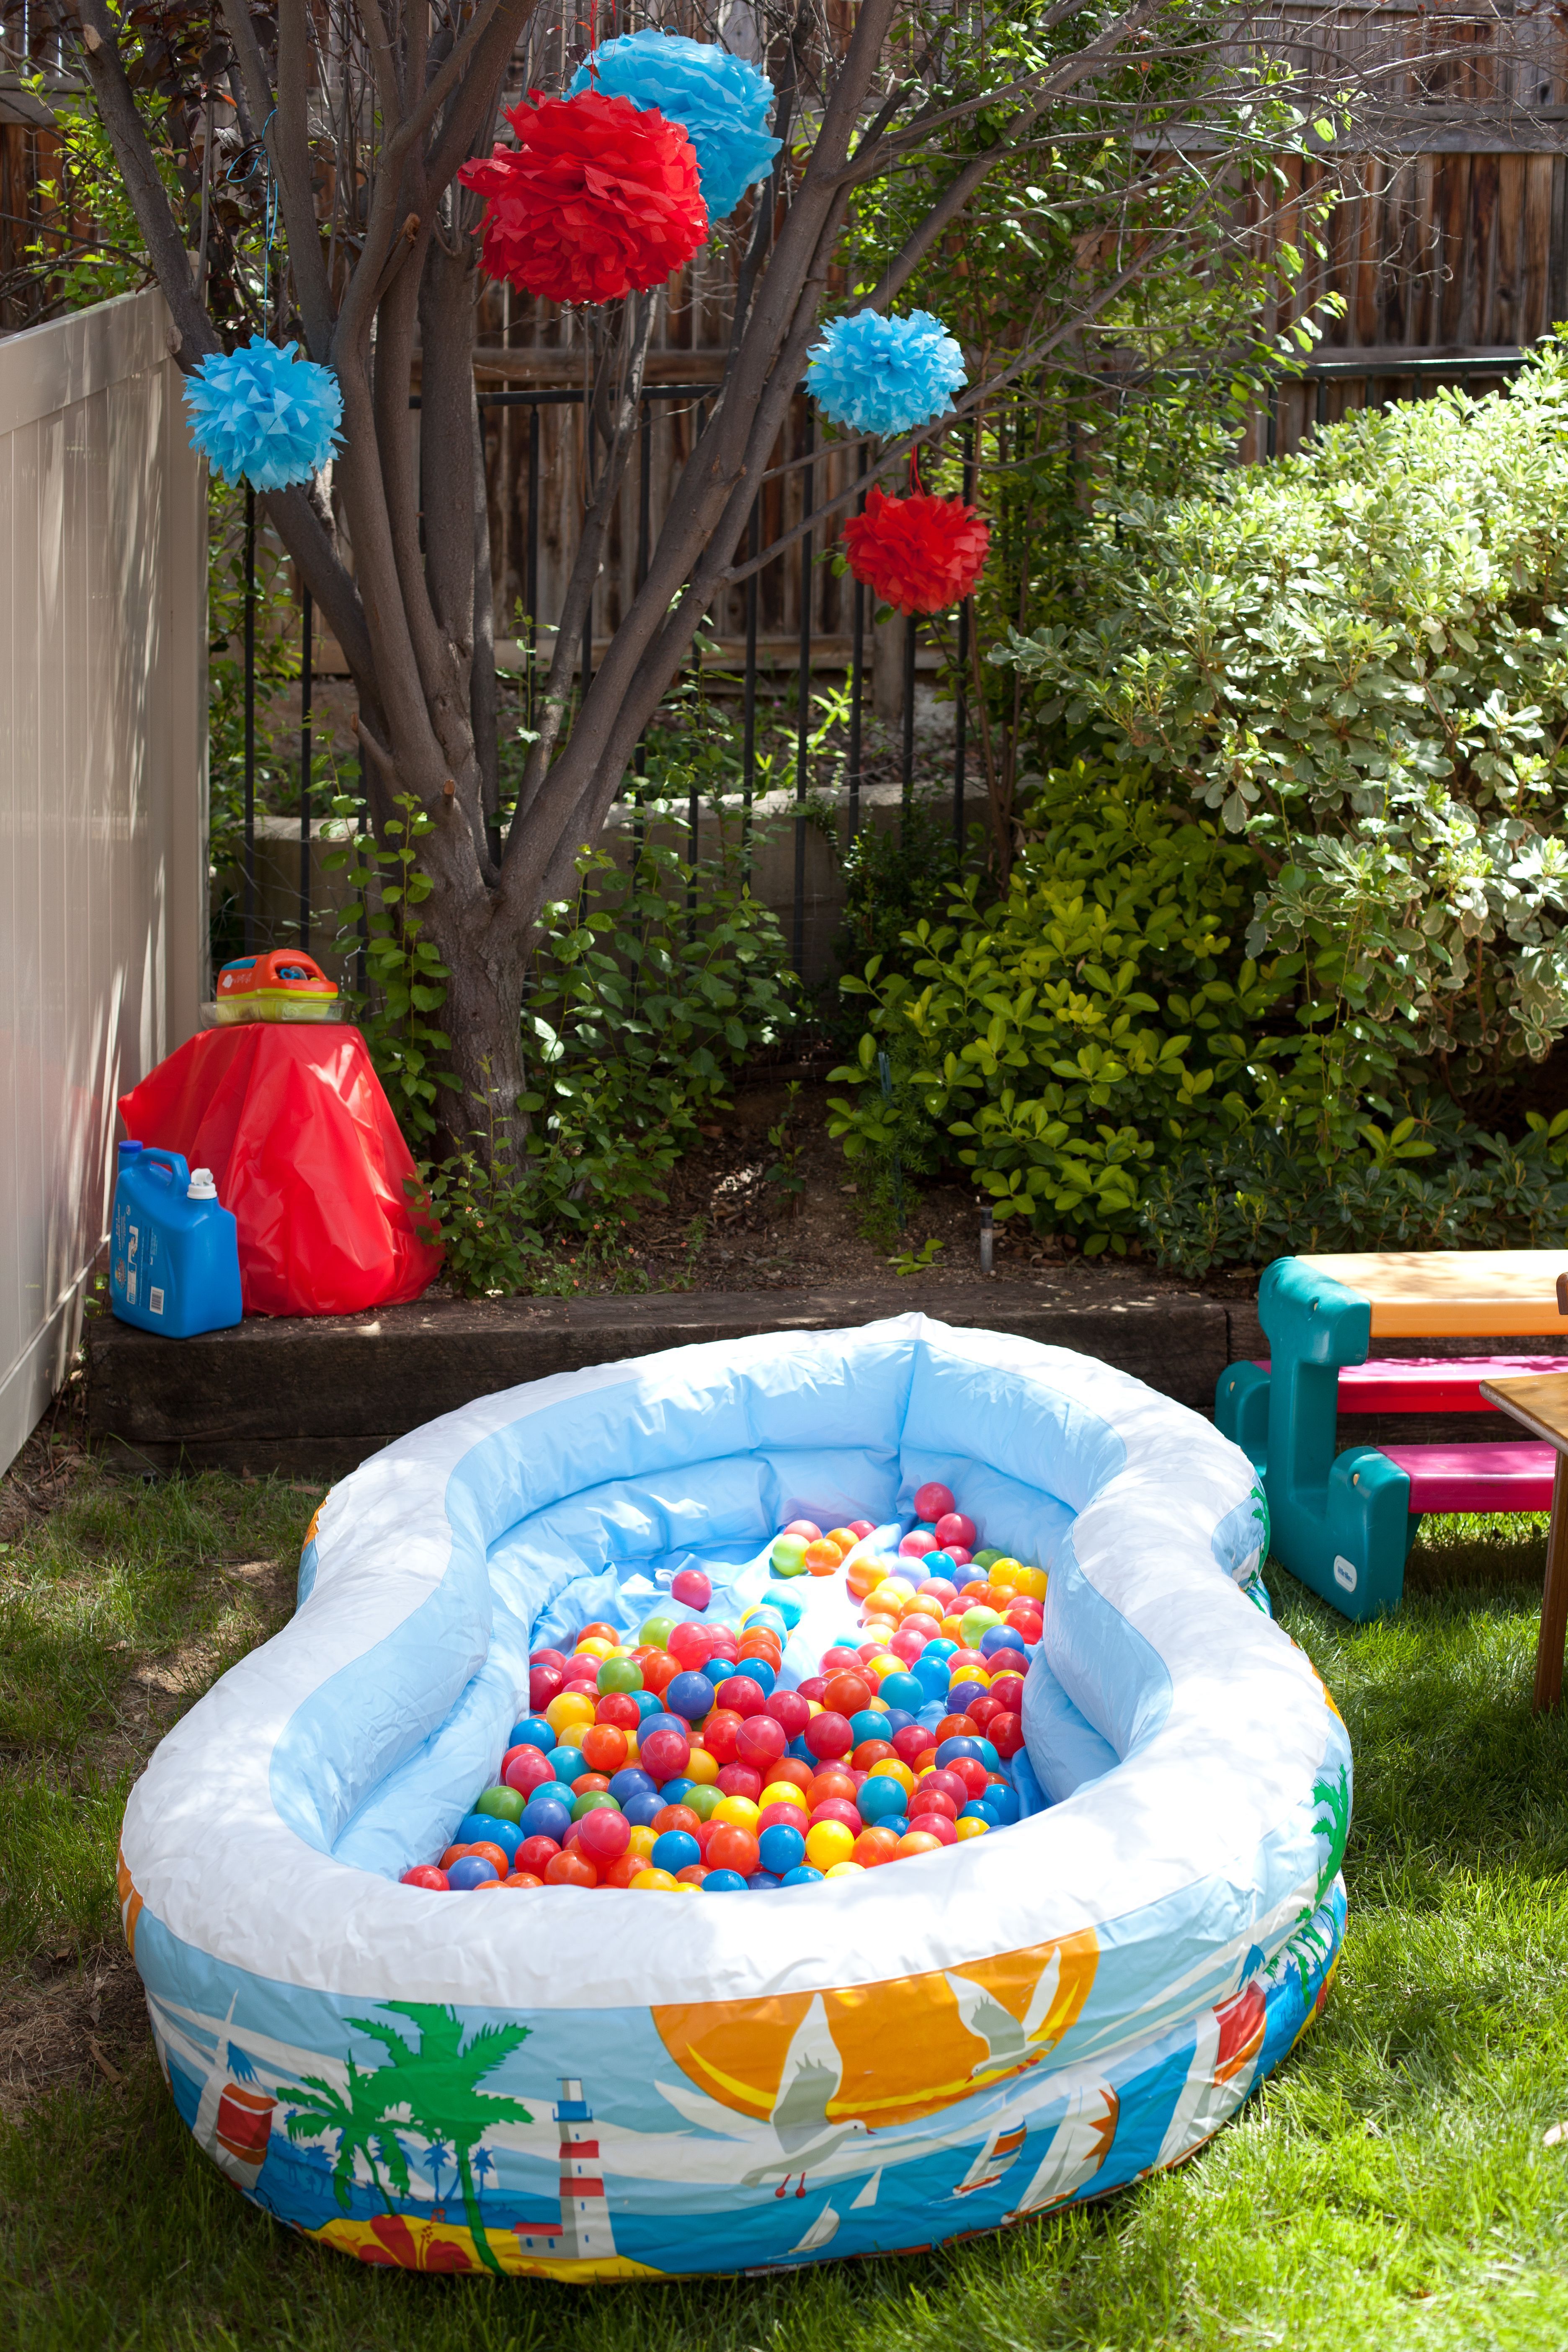 1st Birthday Party Activity / Entertainment: Ball Pit! Great idea considering baby #2s birthday will be in July! :D